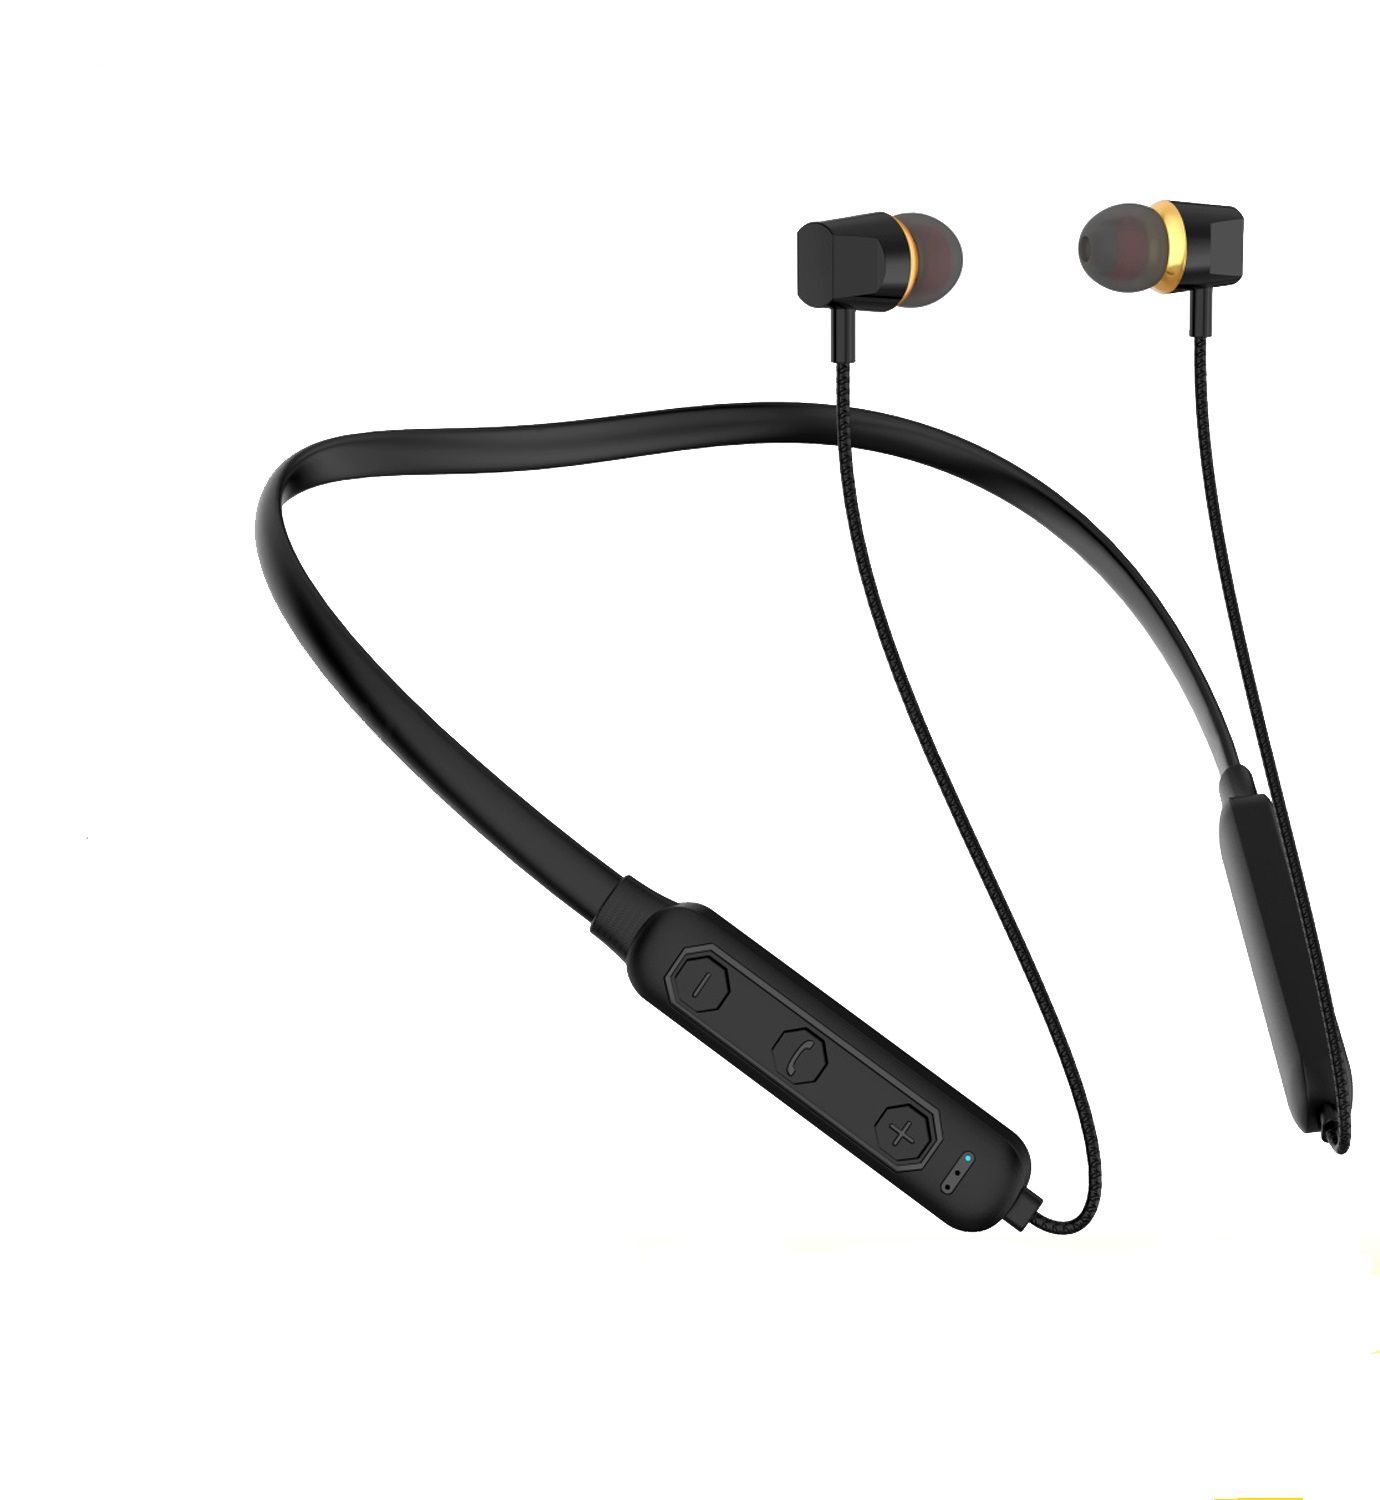     			TUNE AUDIO TITAN DOLBY EFFECT BASS SOUND IPX5 WITH MASSIVE 26 HOURS MUSIC PLAYBACK WITH BOOSTED SOUND BLUETOOTH HEADPHONE,BLUETOOTH EARPHONE,BLUETOOTH NECKBAND FOR TUNE AUDIO